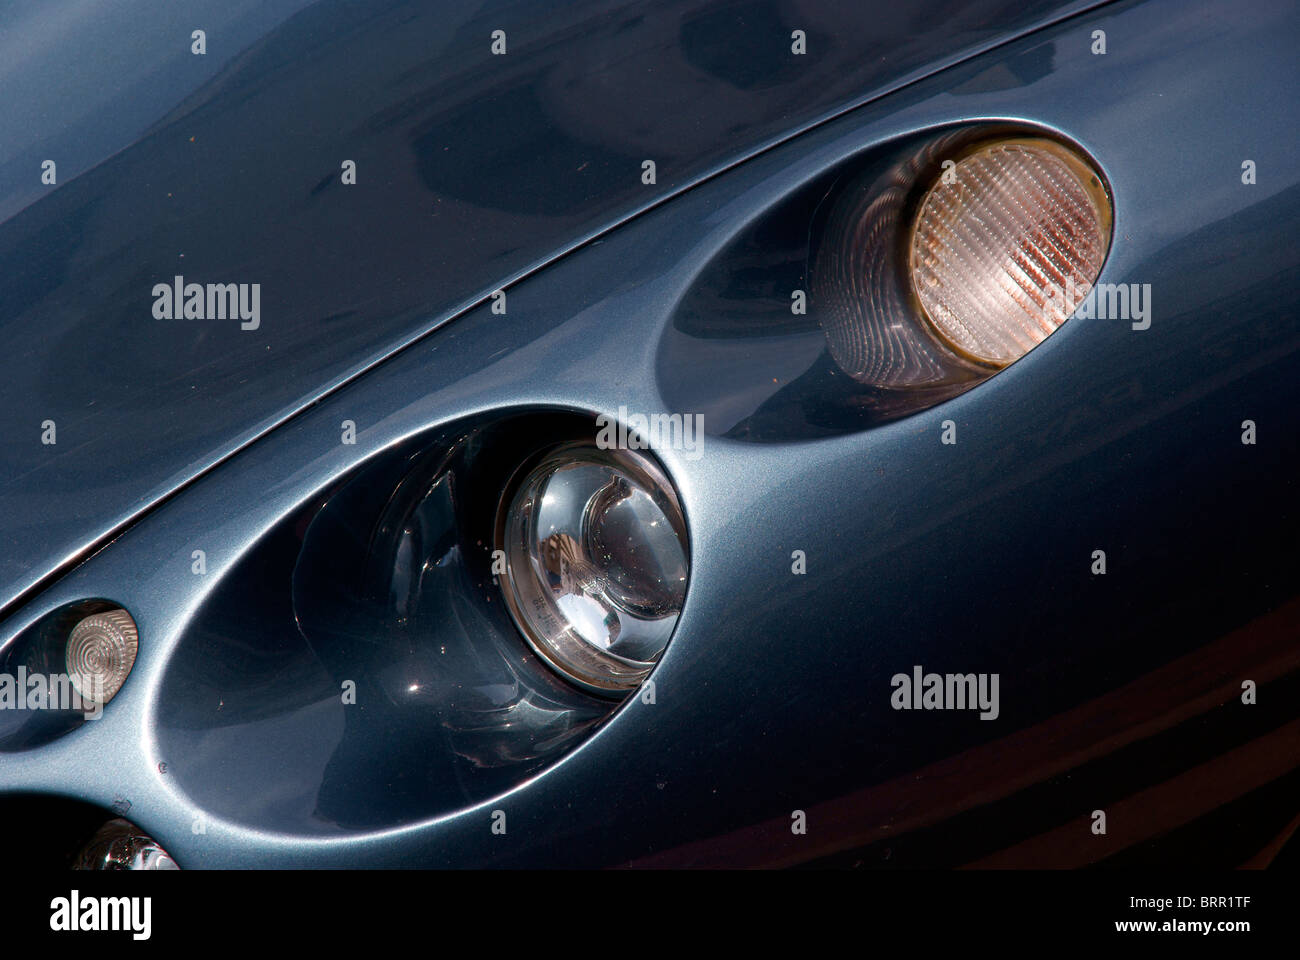 TVR Tuscan S headlight cluster Stock Photo